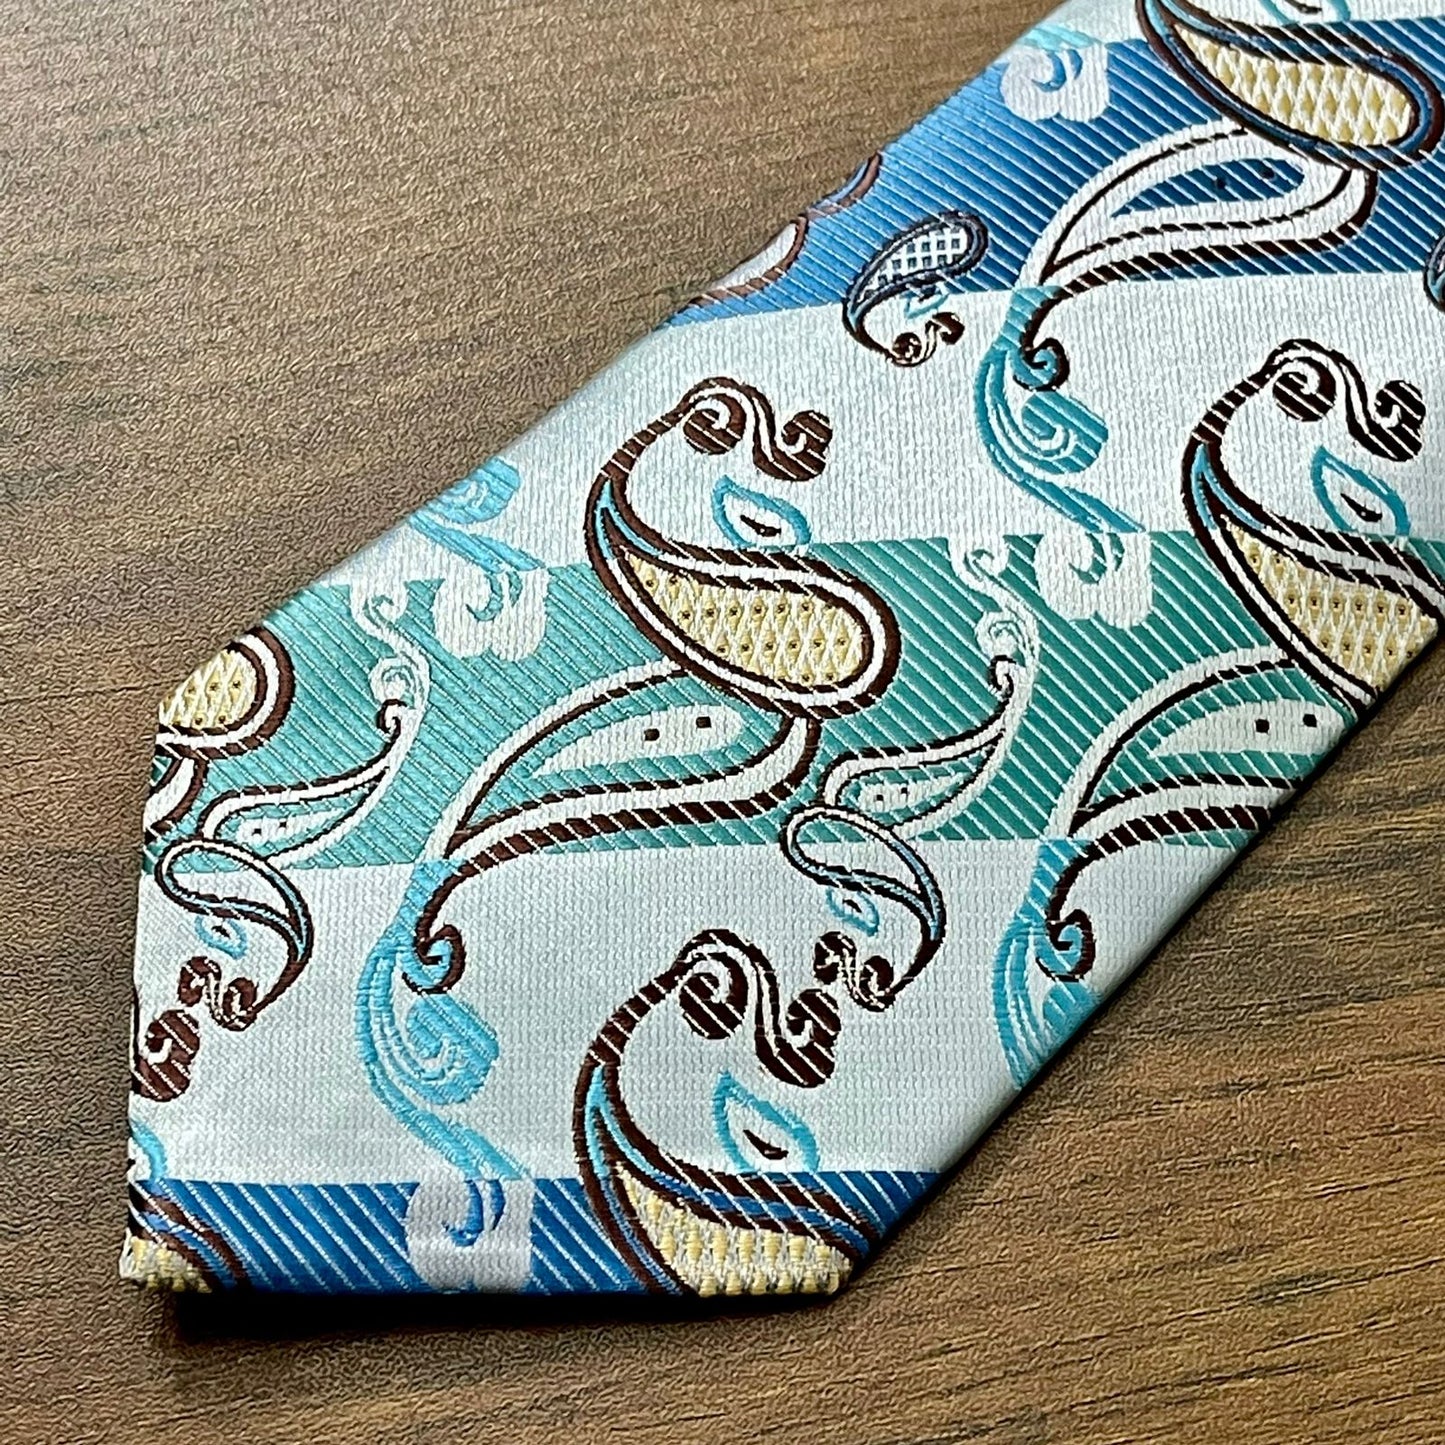 Blue And Green Paisley Tie Set For Men